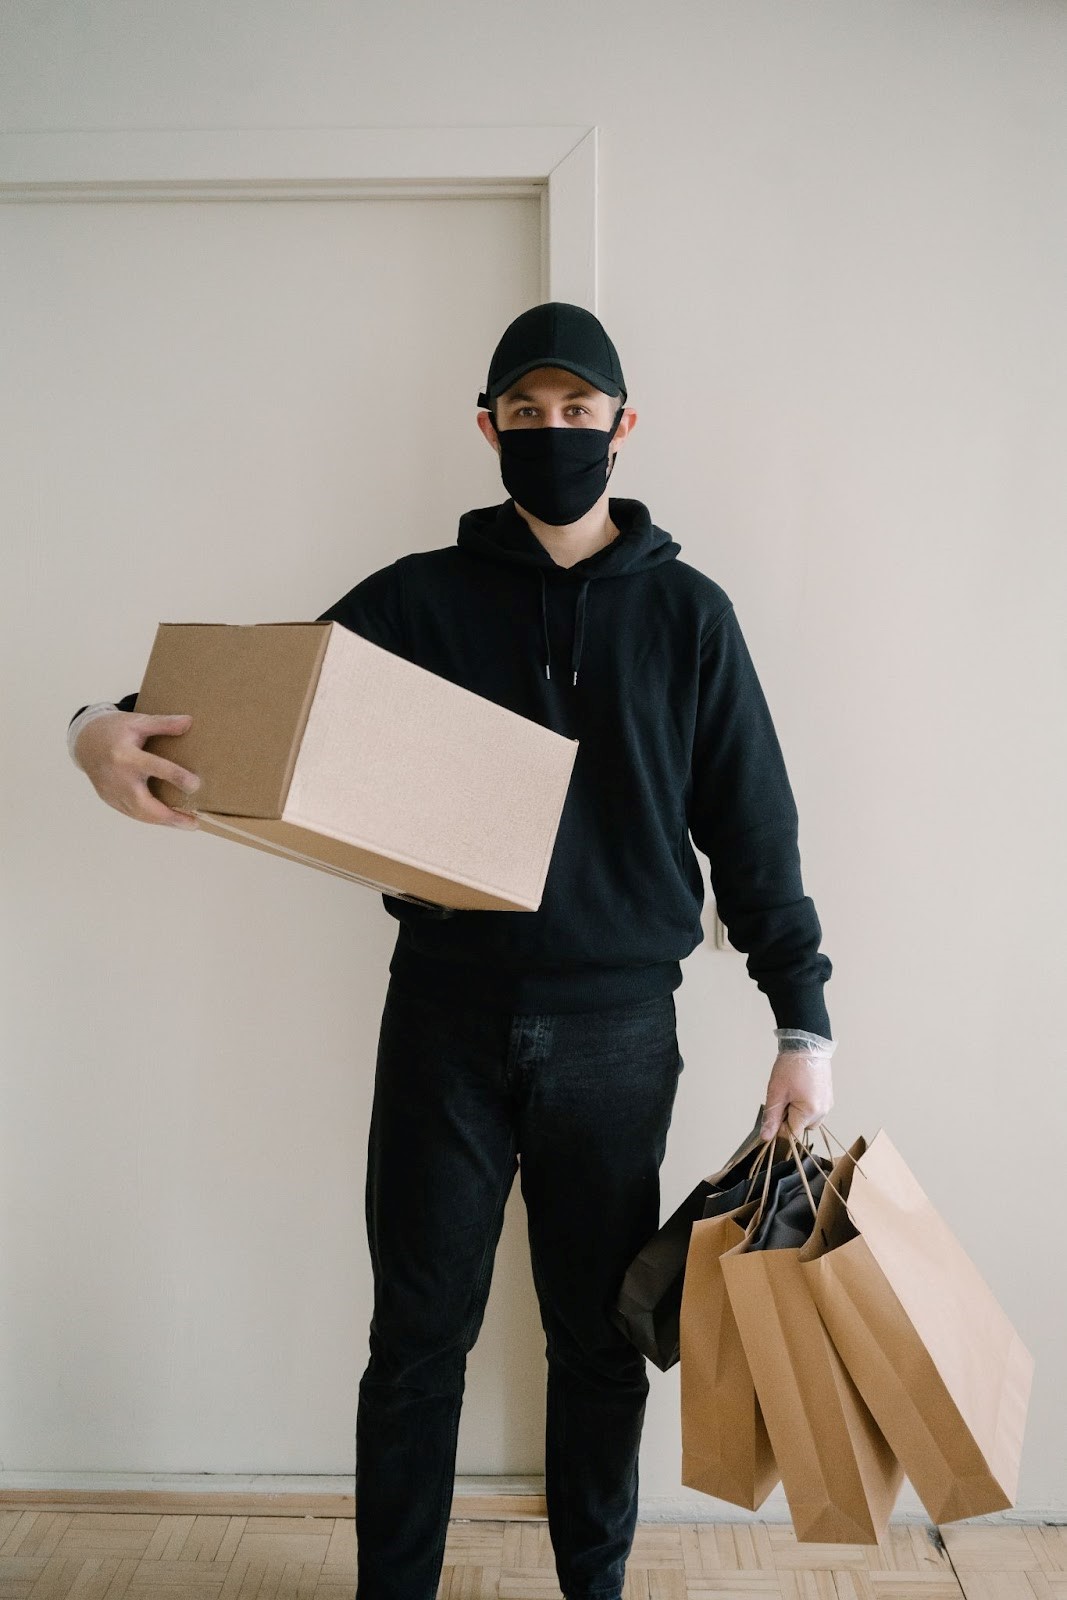 How to tackle package theft in NYC?